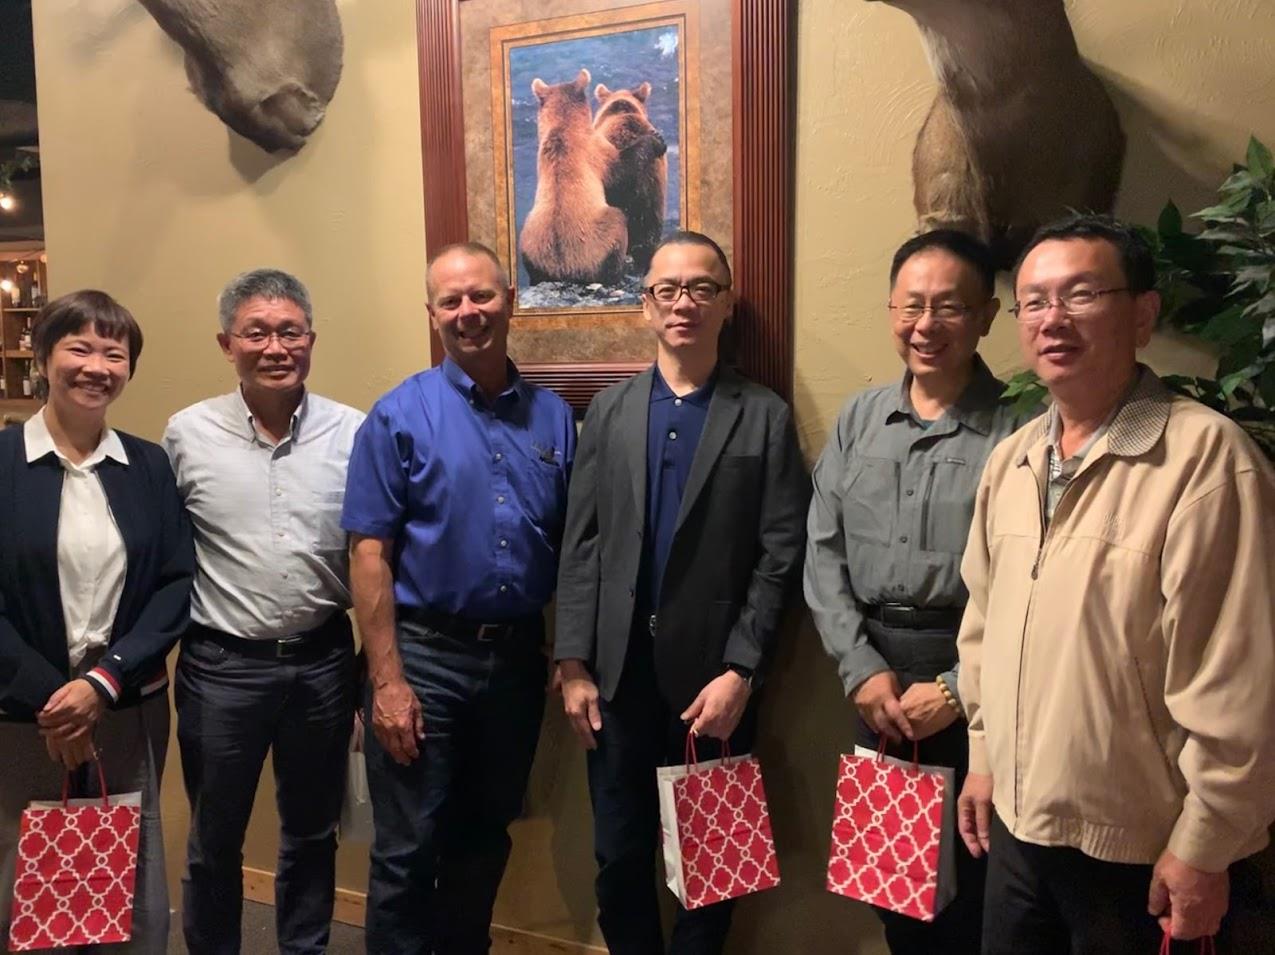 Idaho Wheat Commissioner Joe Anderson, third from left, poses for a photo with members of a group representing the Taiwan Flour Mills Association, which visited Idaho Sept. 6-9. 